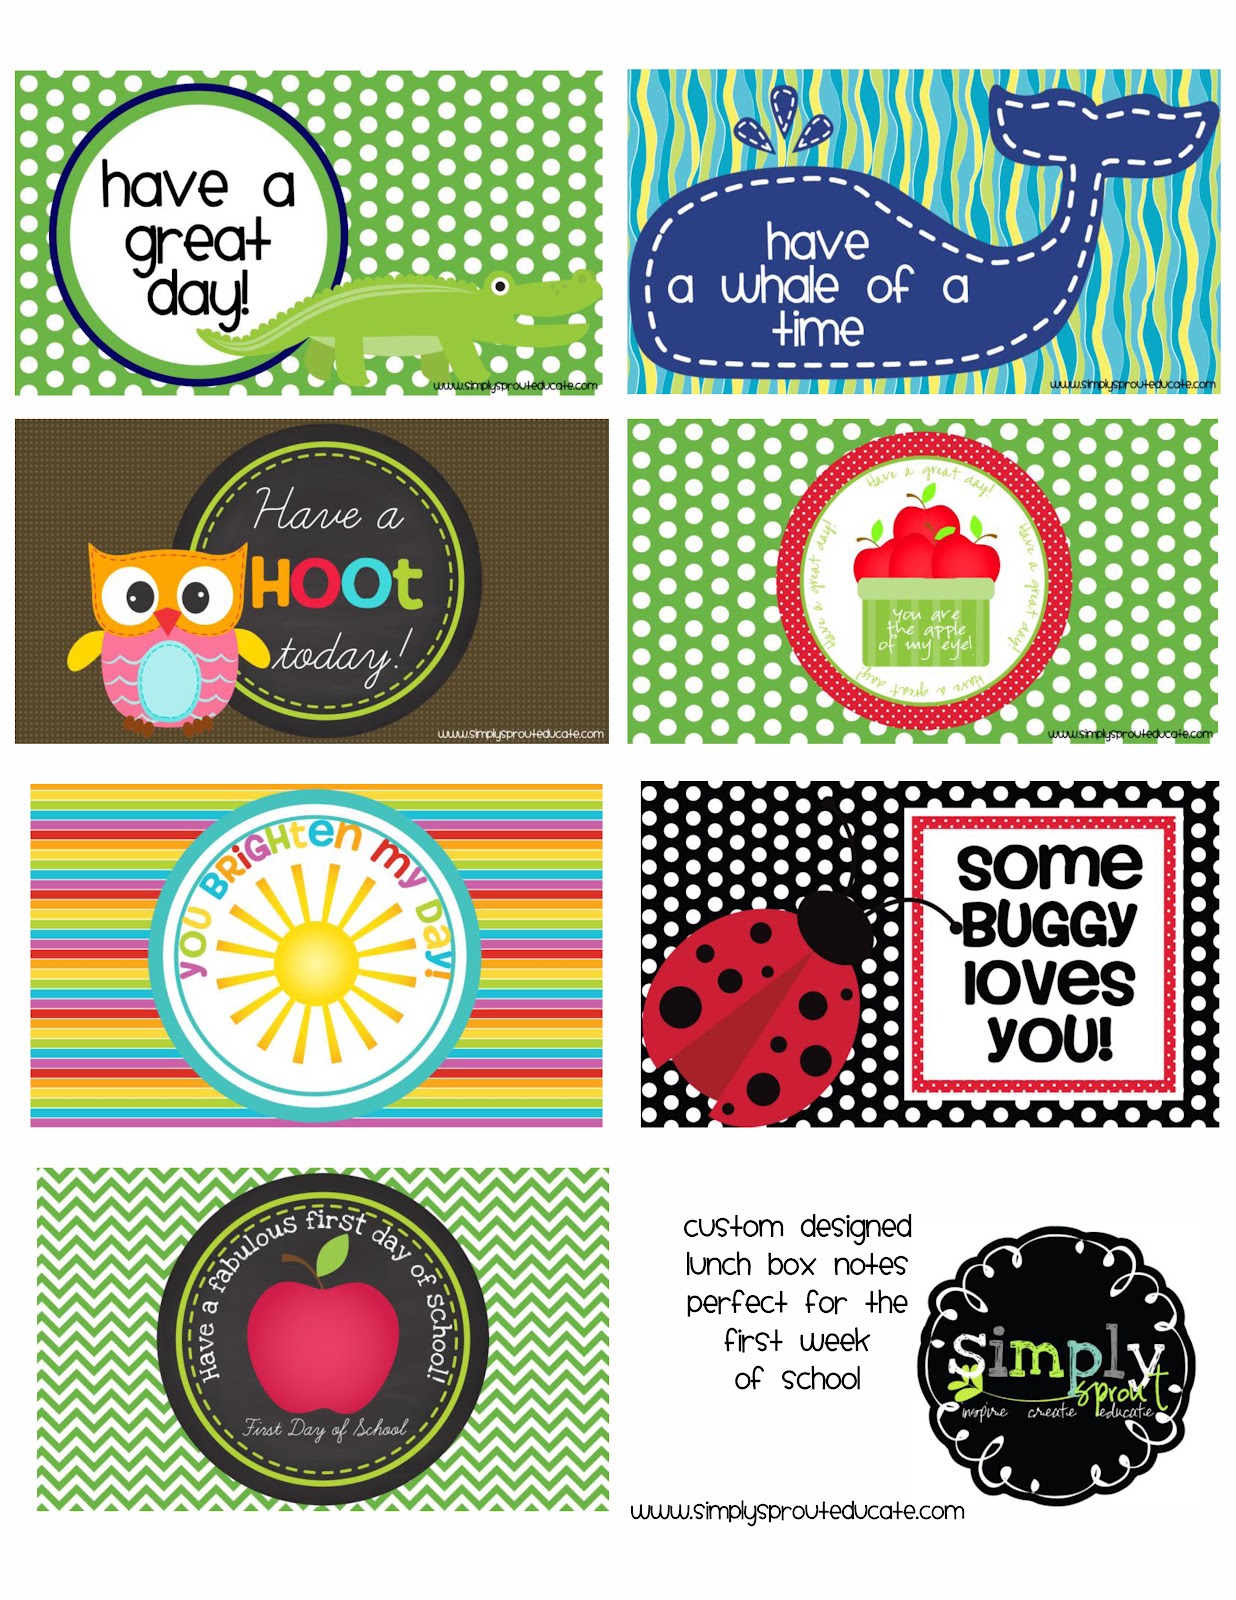 a-little-note-free-lunch-note-printables-s